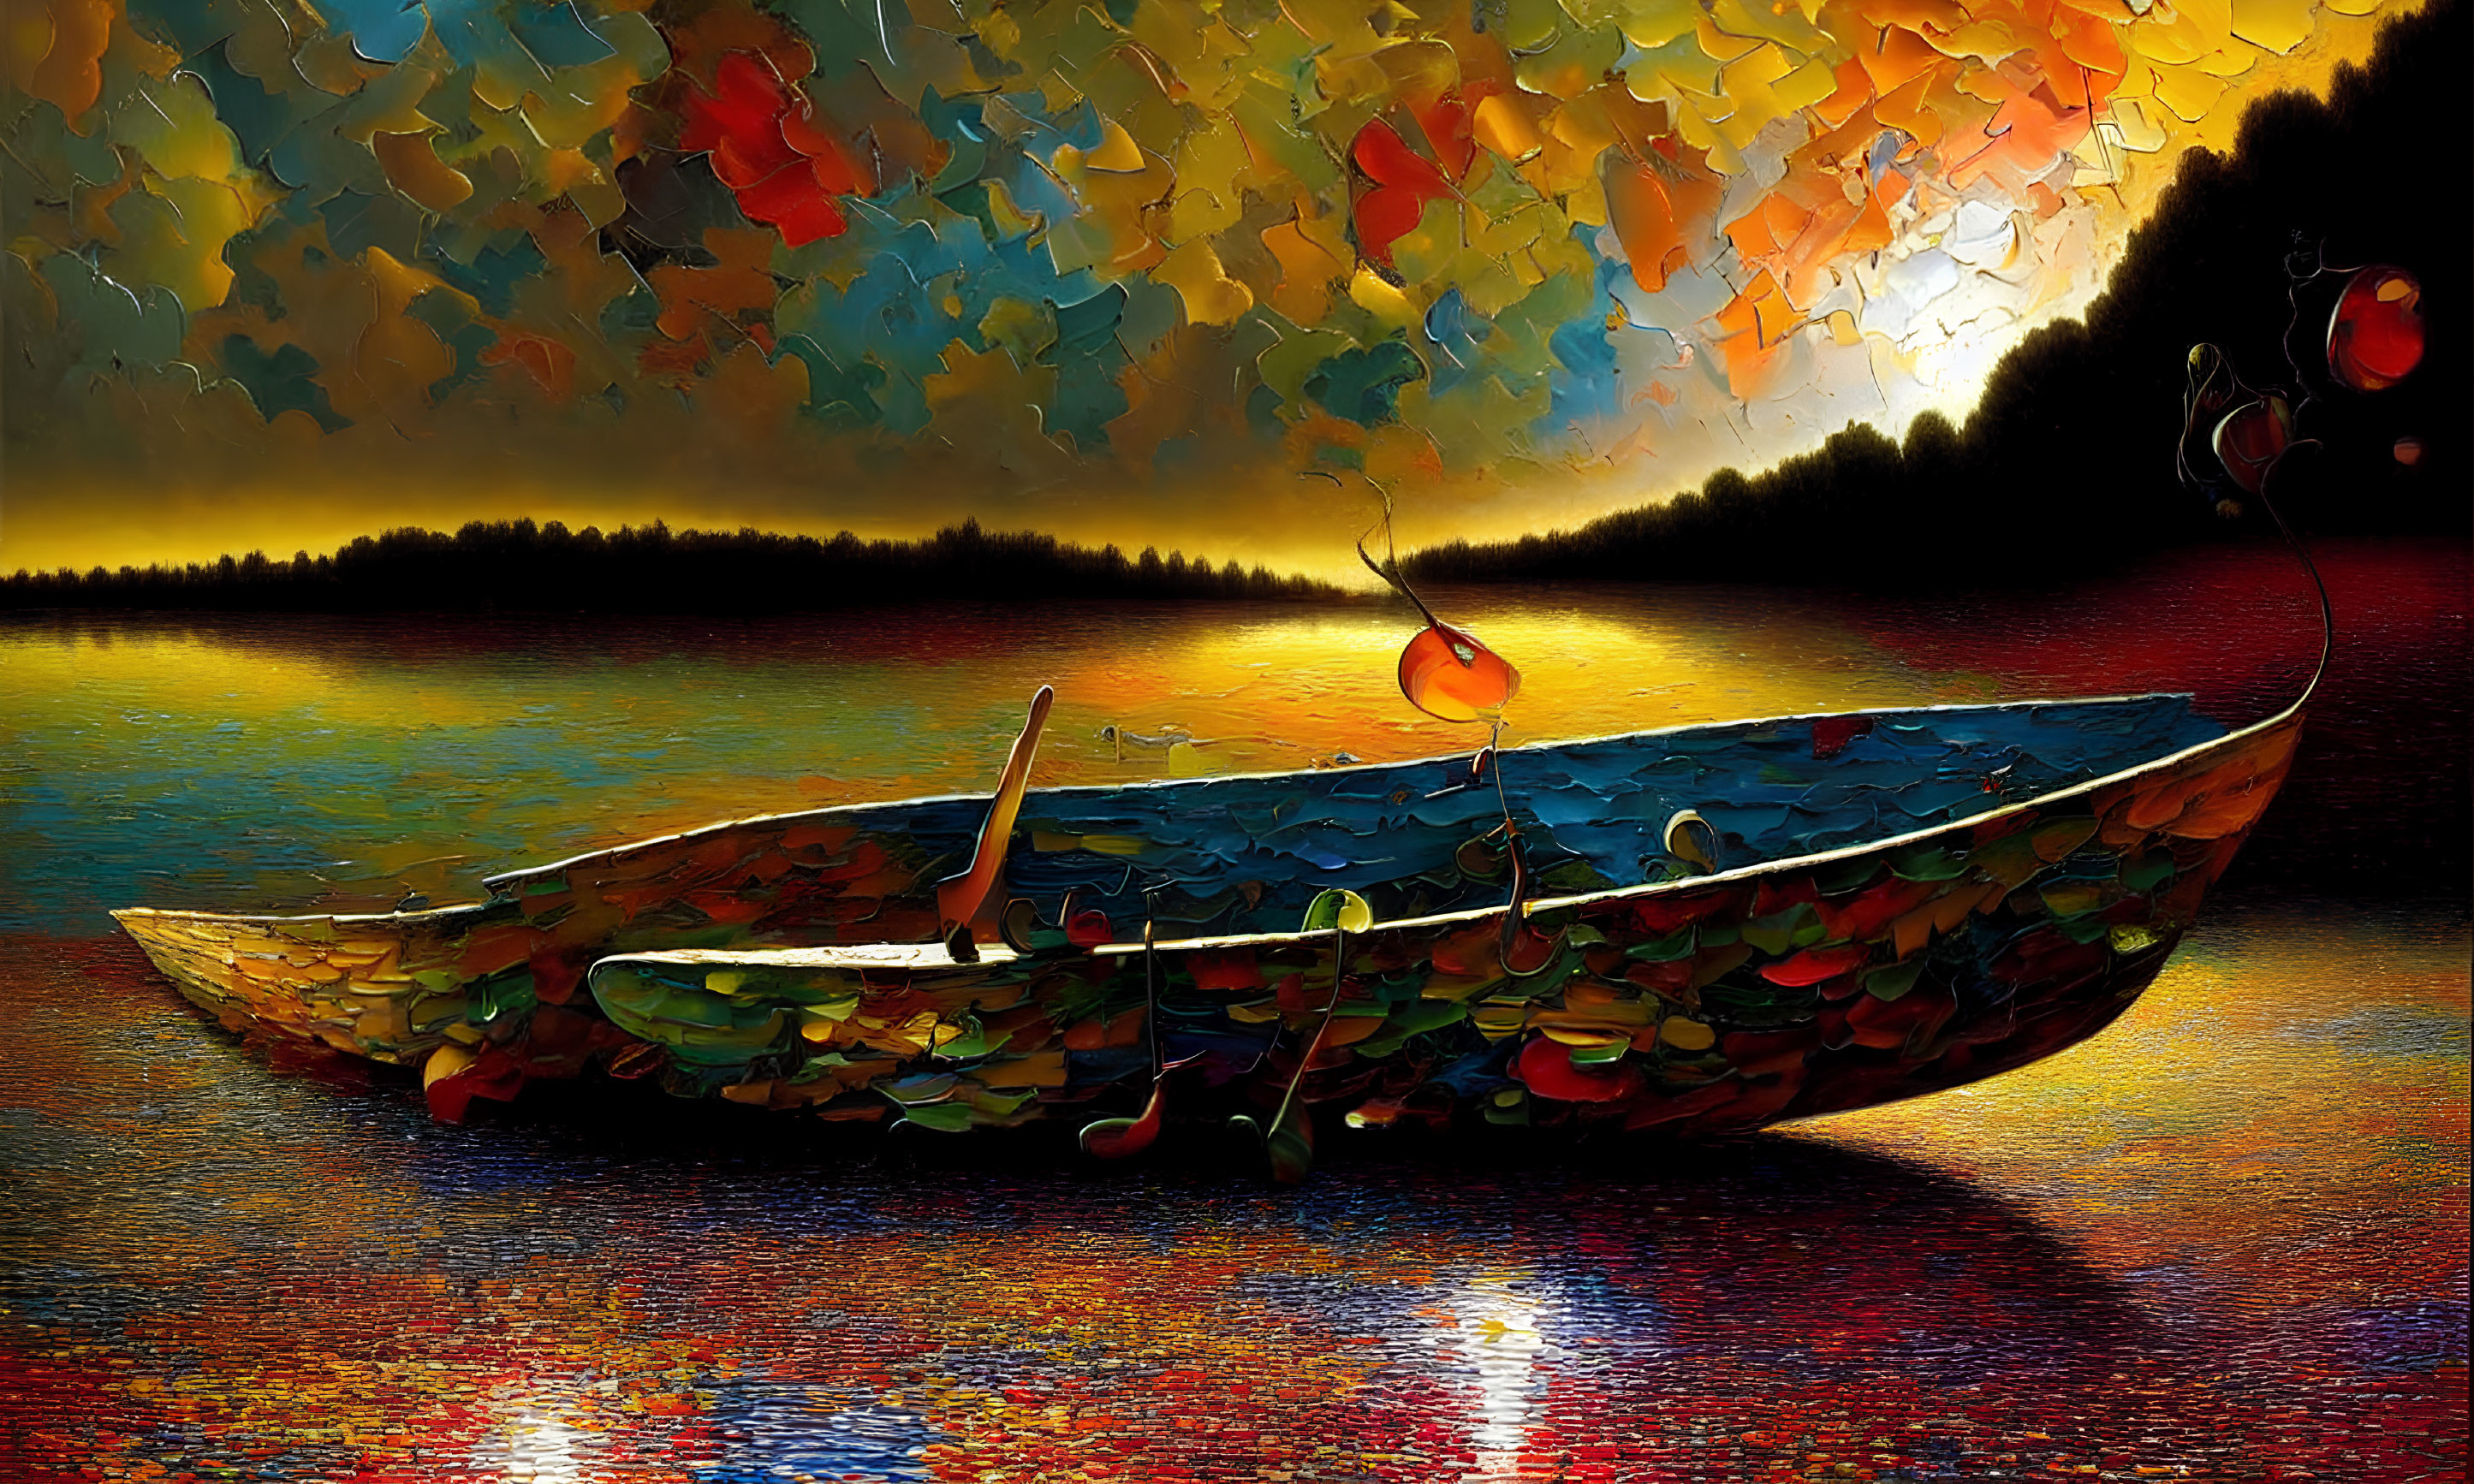 Vivid Sunset Boat Painting with Textured, Surreal Style